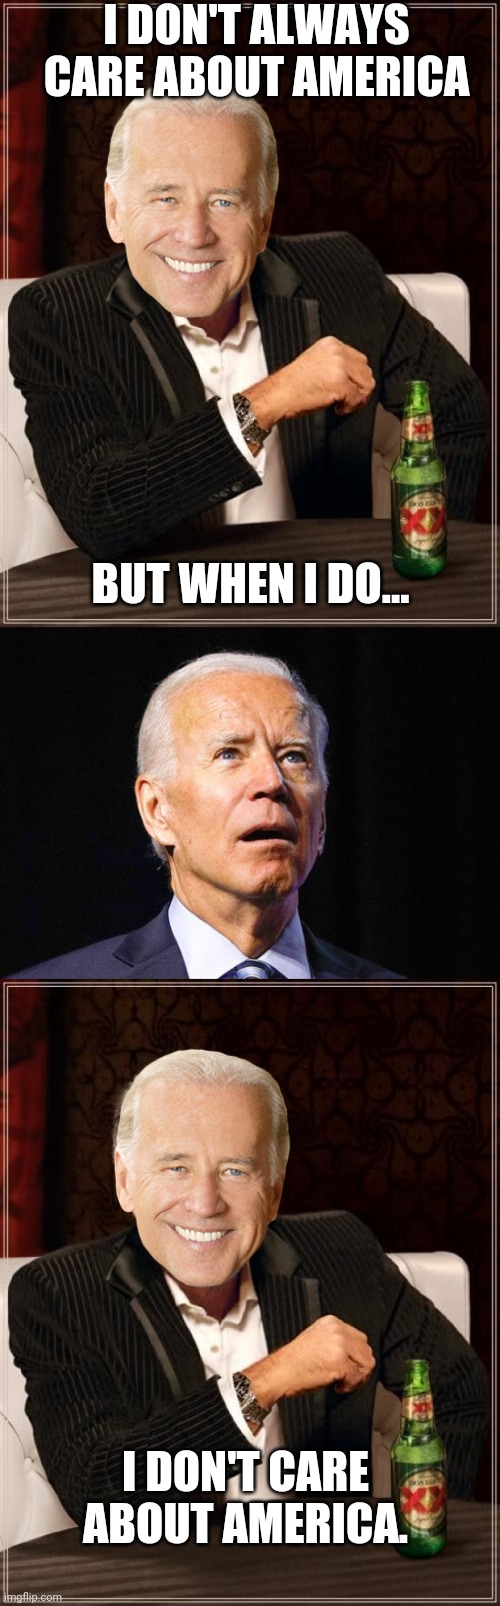 I DON'T ALWAYS CARE ABOUT AMERICA; BUT WHEN I DO... I DON'T CARE ABOUT AMERICA. | image tagged in memes,the most interesting man in the world,joe biden | made w/ Imgflip meme maker